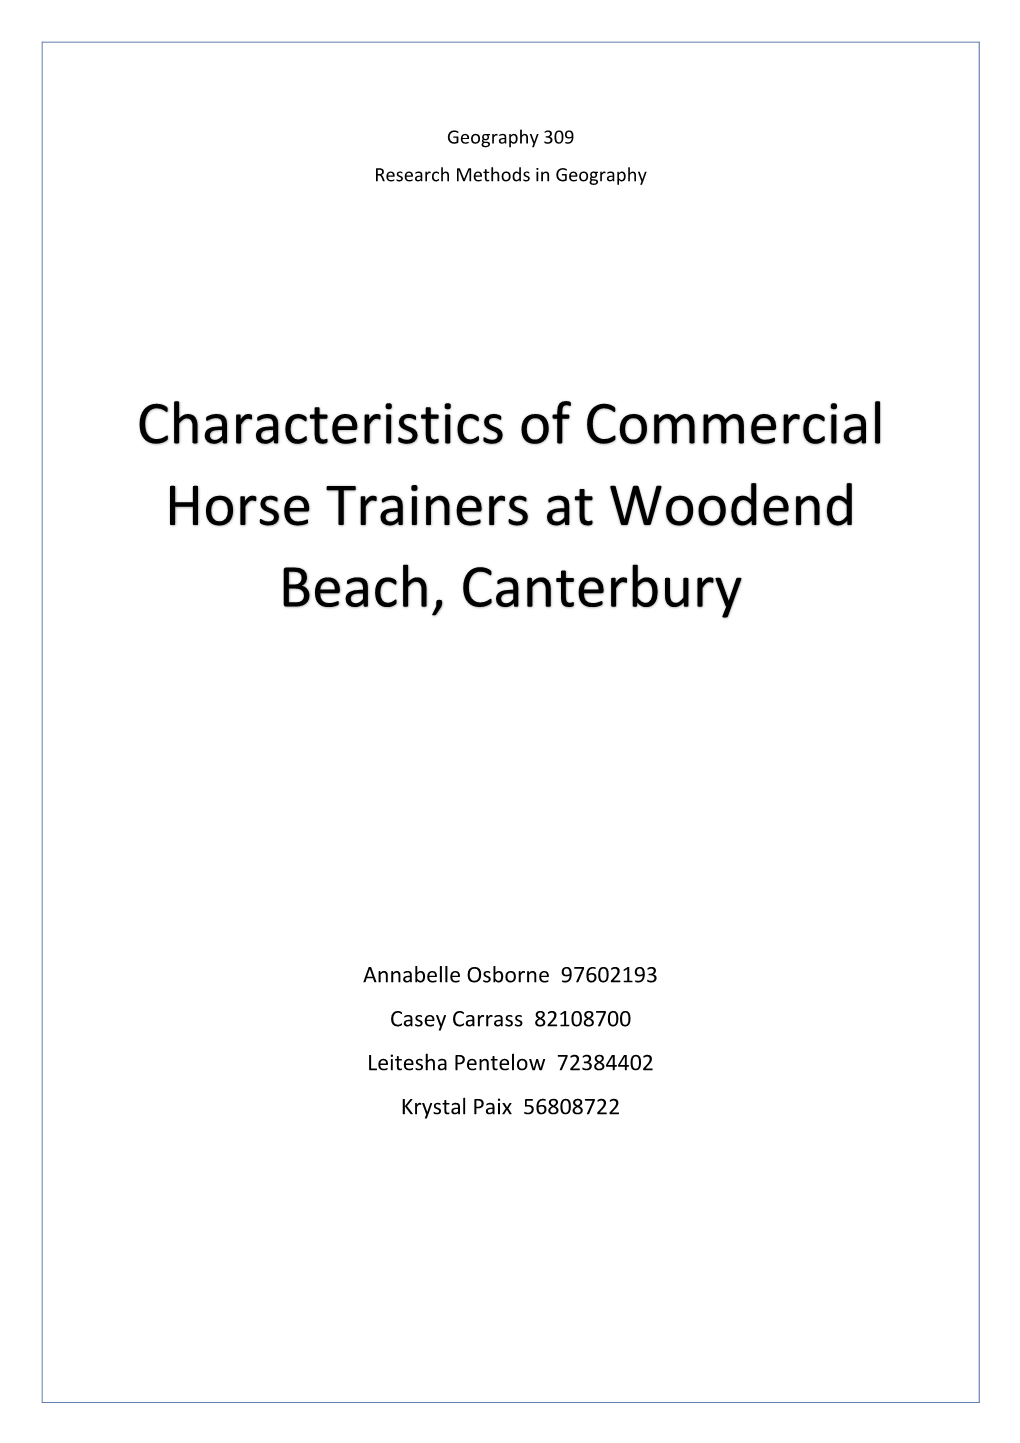 Characteristics of Commercial Horse Trainers at Woodend Beach, Canterbury